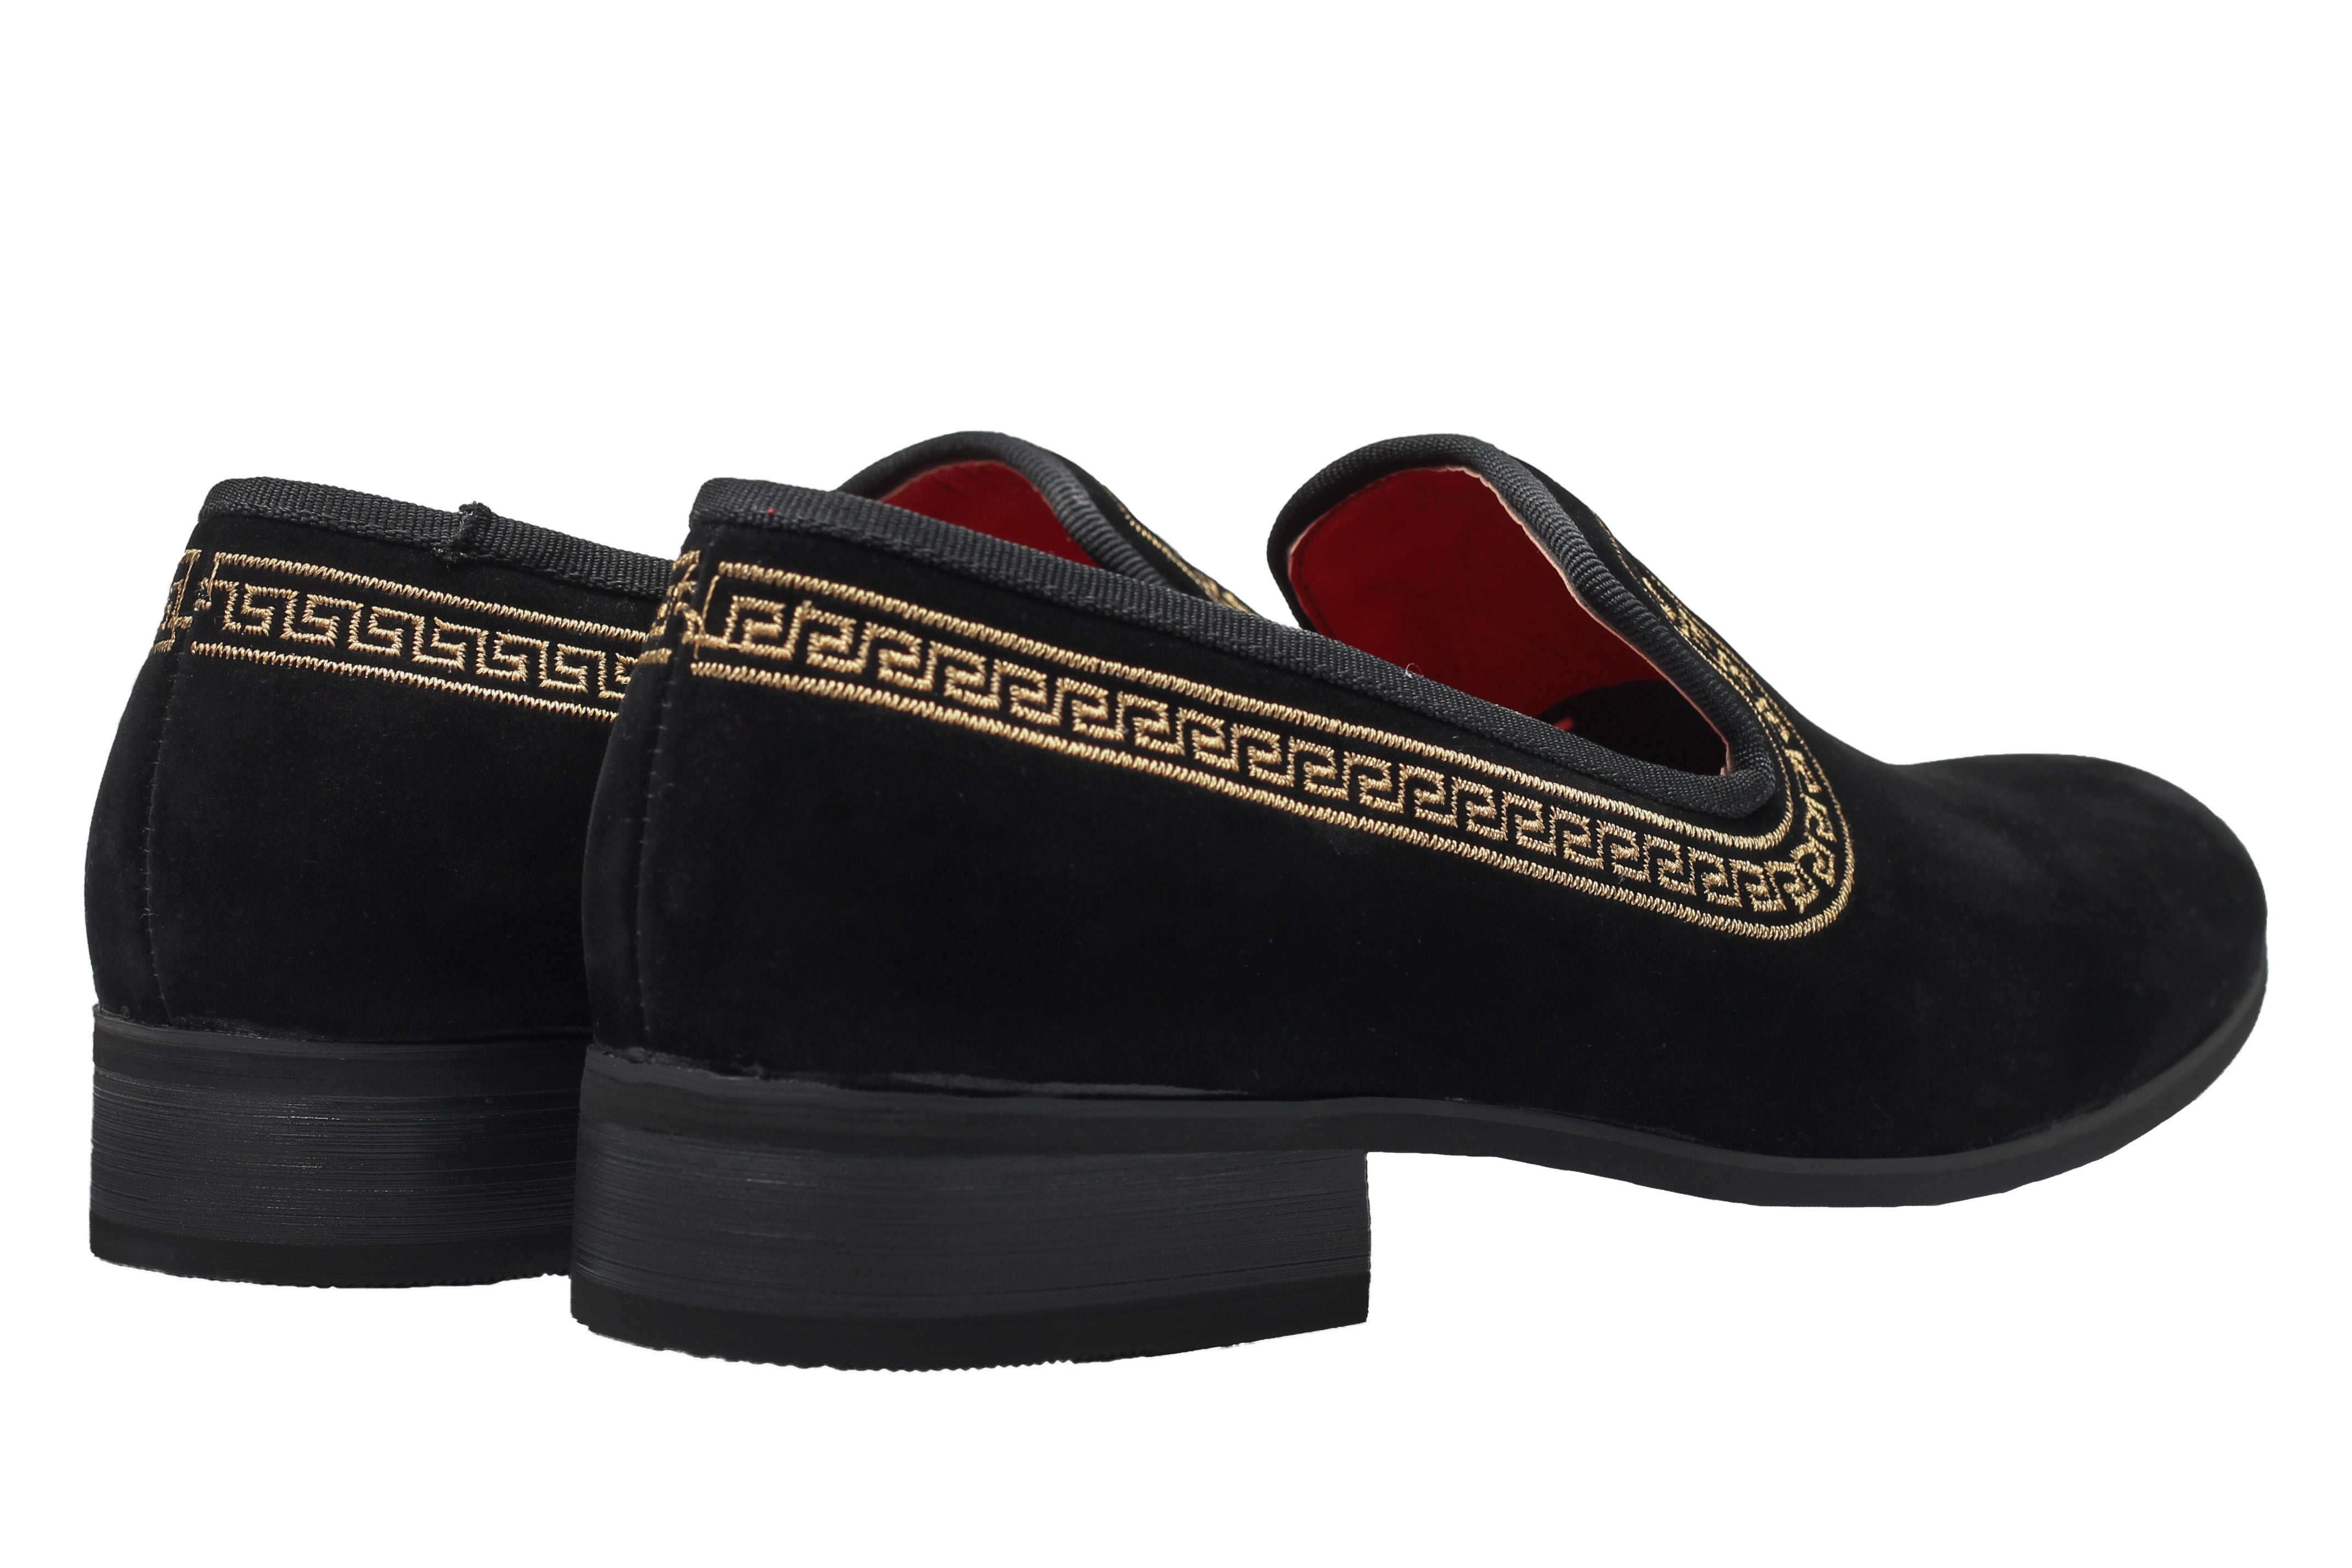 FAUX LEATHER MOSAIC PATTERN EMBROIDERY LOAFERS IN BLACK